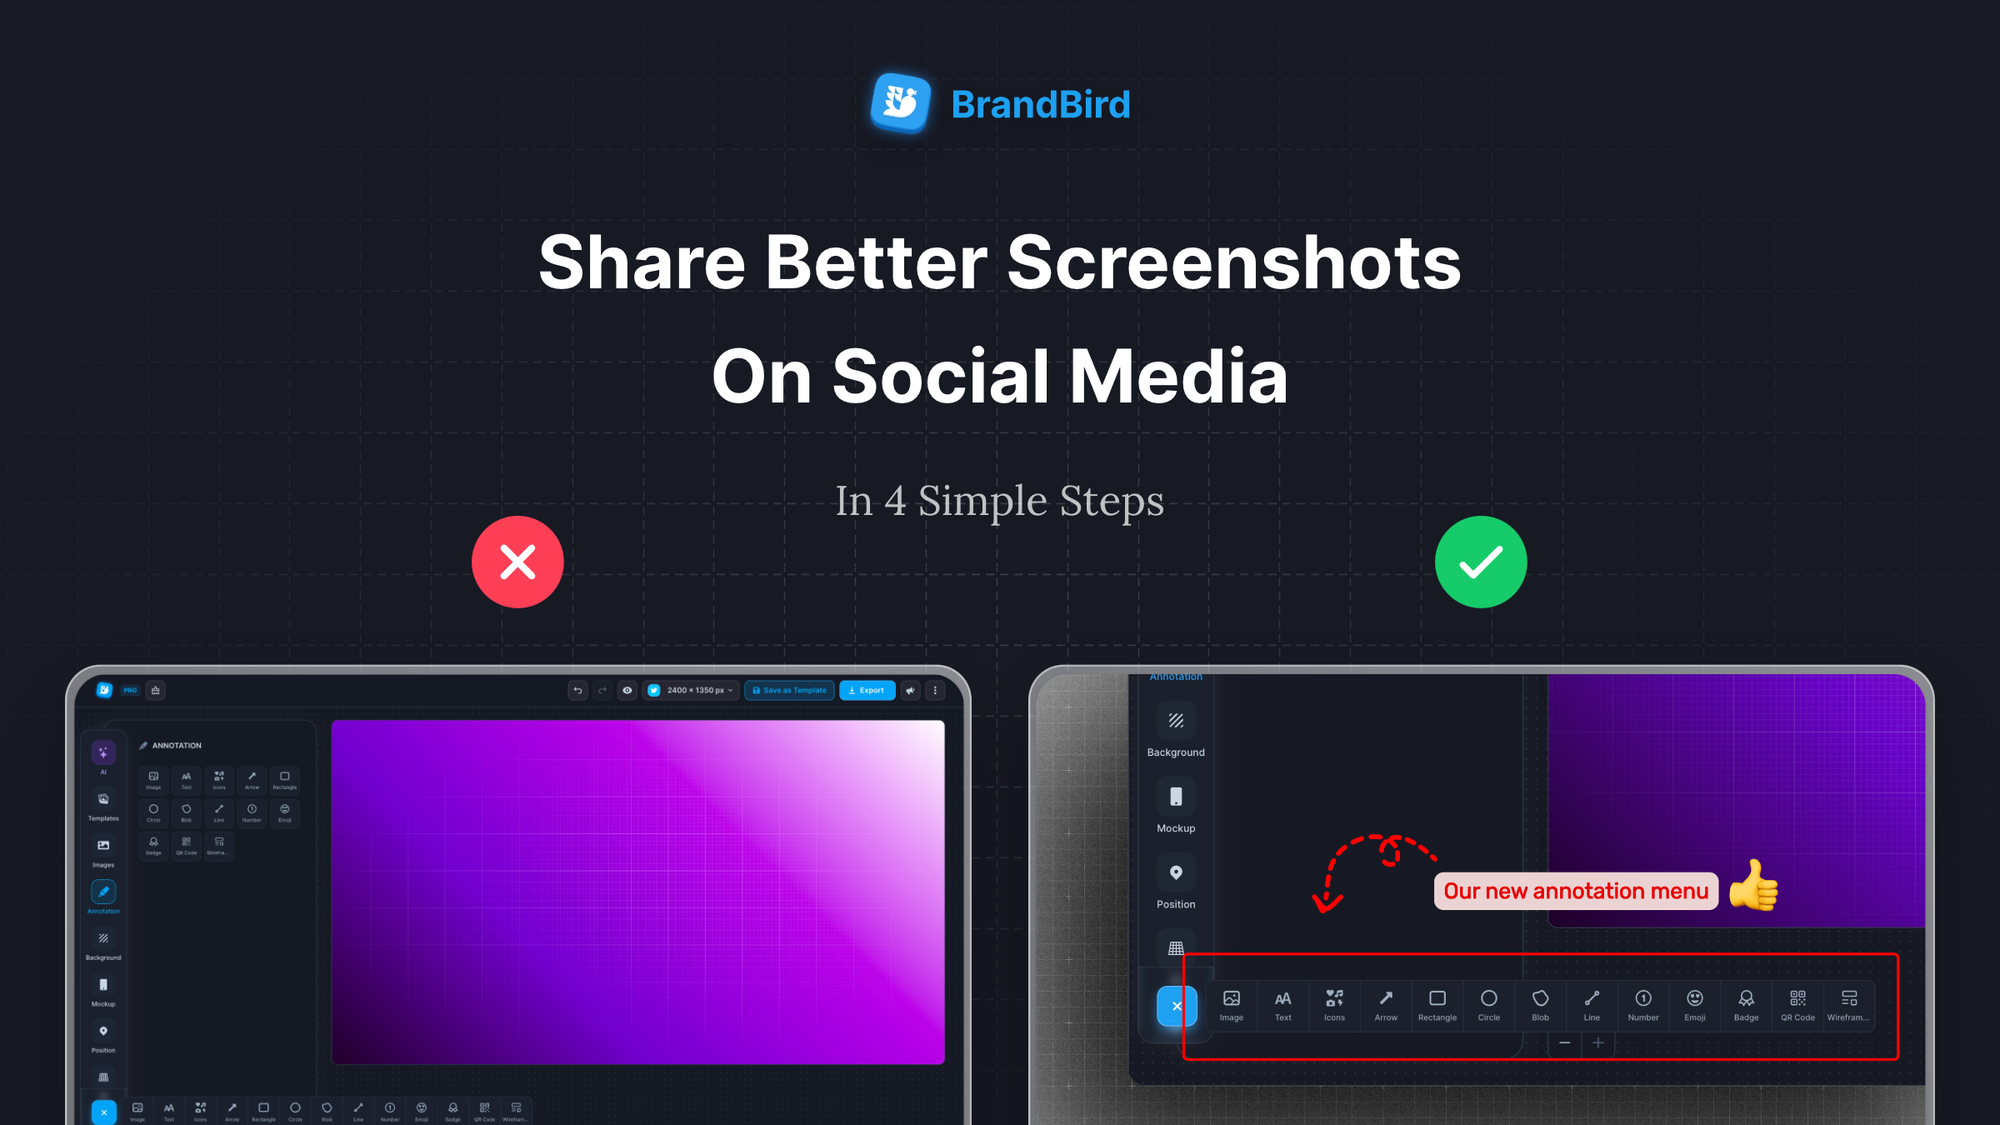 Share Better Screenshots On Social Media [Step-by-step guide]